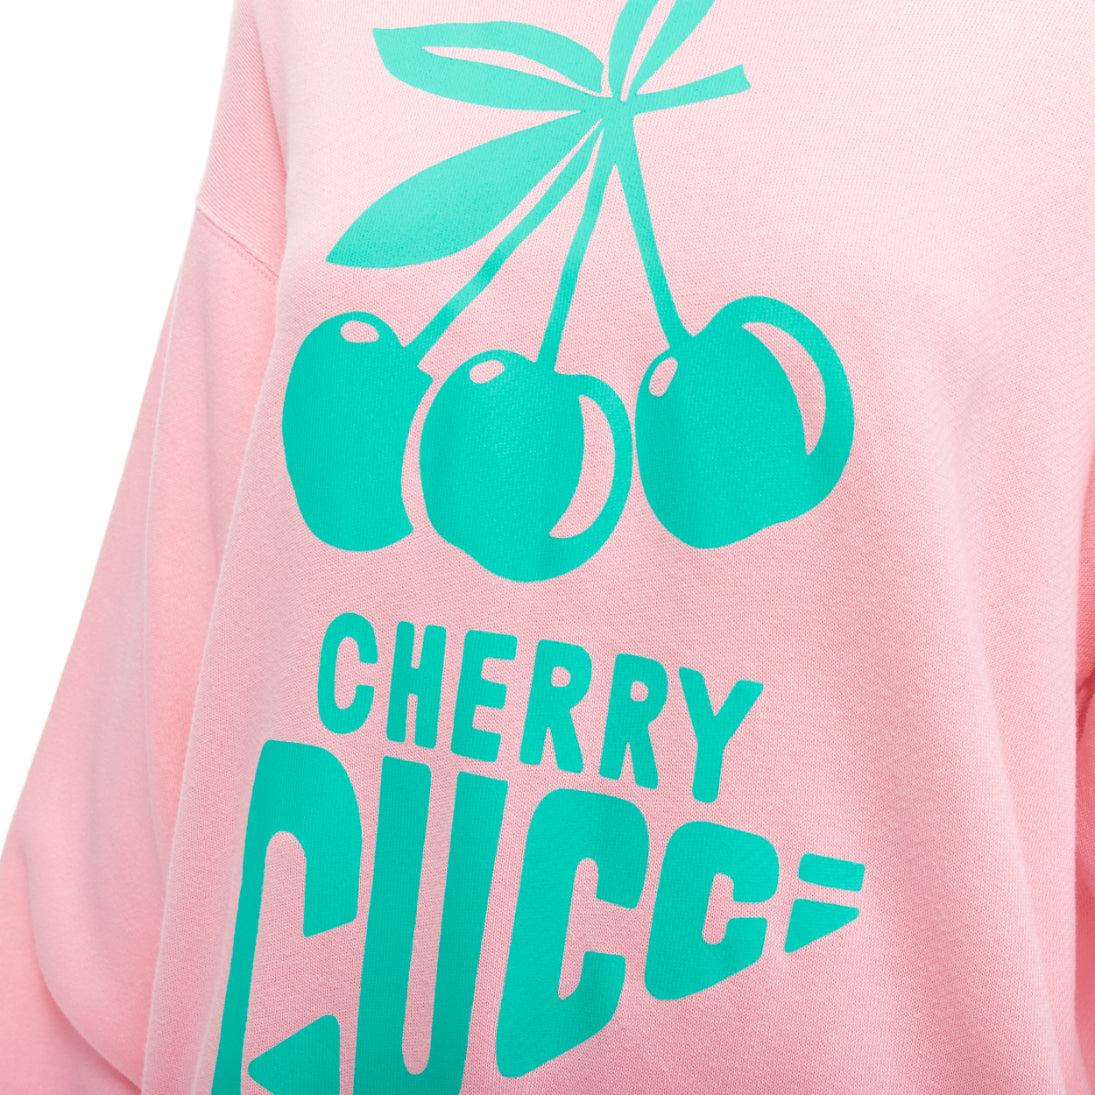 GUCCI Cherry sugar pink aqua green cherry print long boxy hoodie S
Reference: KYCG/A00059
Brand: Gucci
Designer: Alessandro Michele
Material: Cotton
Color: Pink, Green
Pattern: Logomania
Closure: Pullover
Made in: Italy

CONDITION:
Condition: